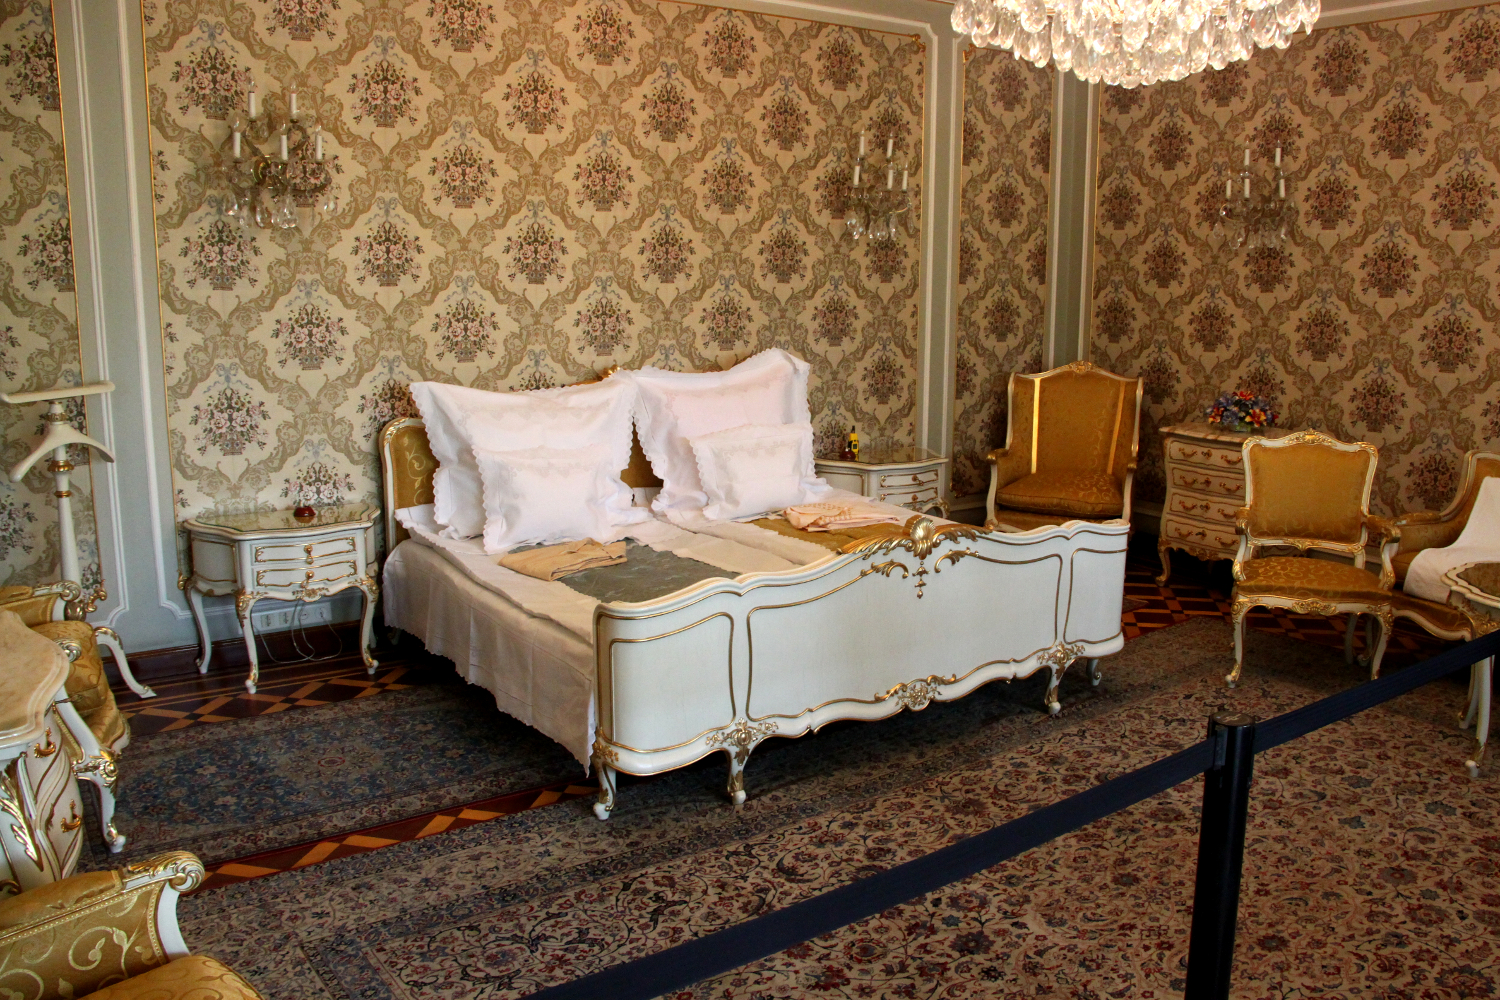 The Spring Palace, Bucharest Romania - Ceausescu's bedroom